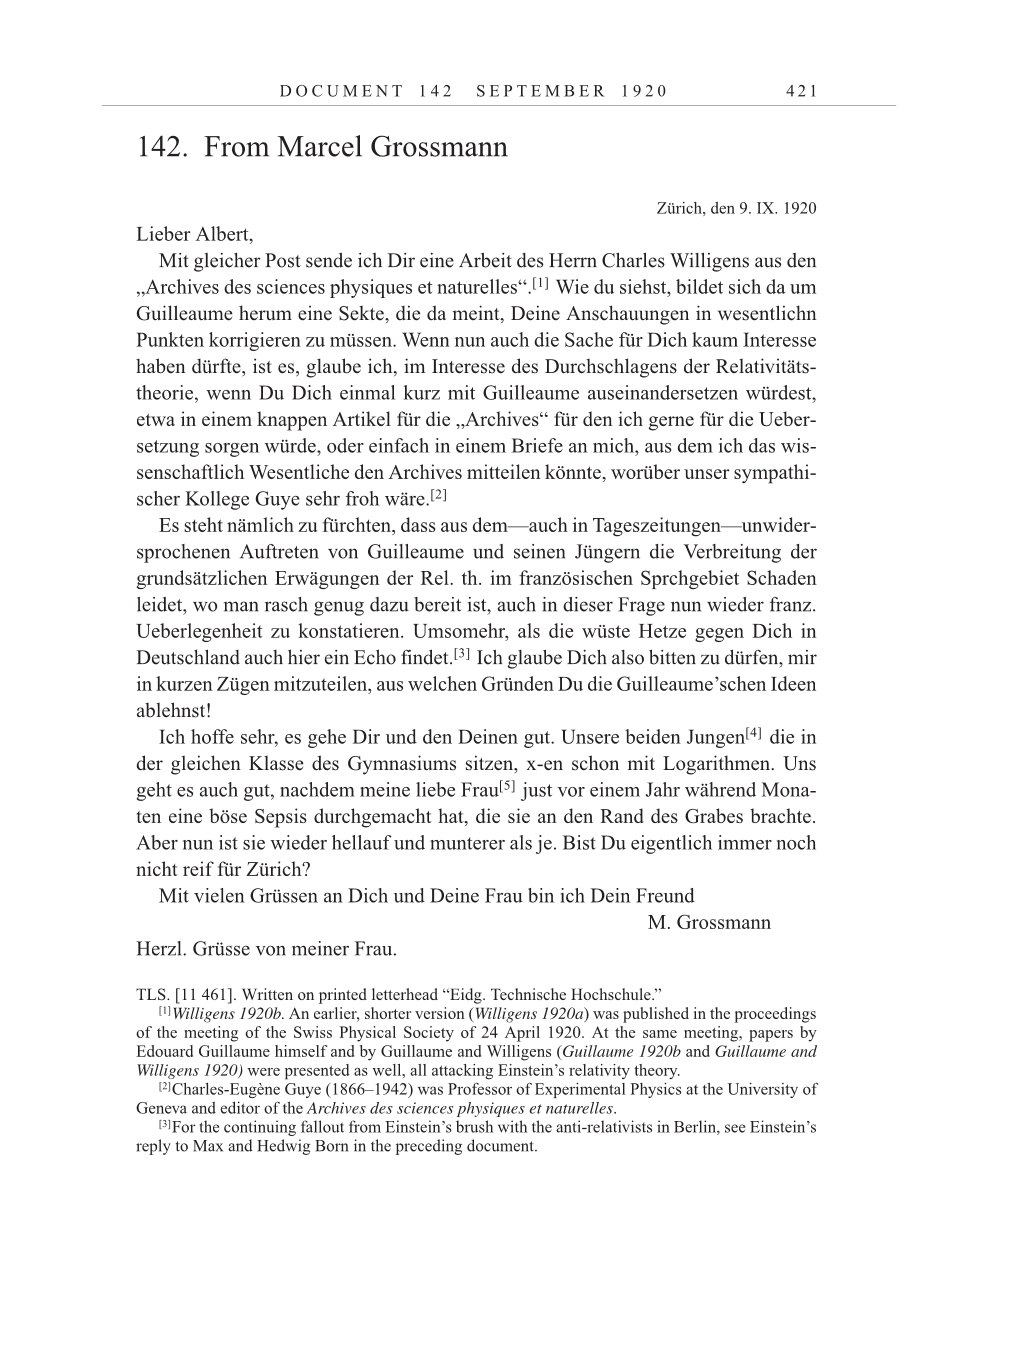 Volume 10: The Berlin Years: Correspondence May-December 1920 / Supplementary Correspondence 1909-1920 page 421